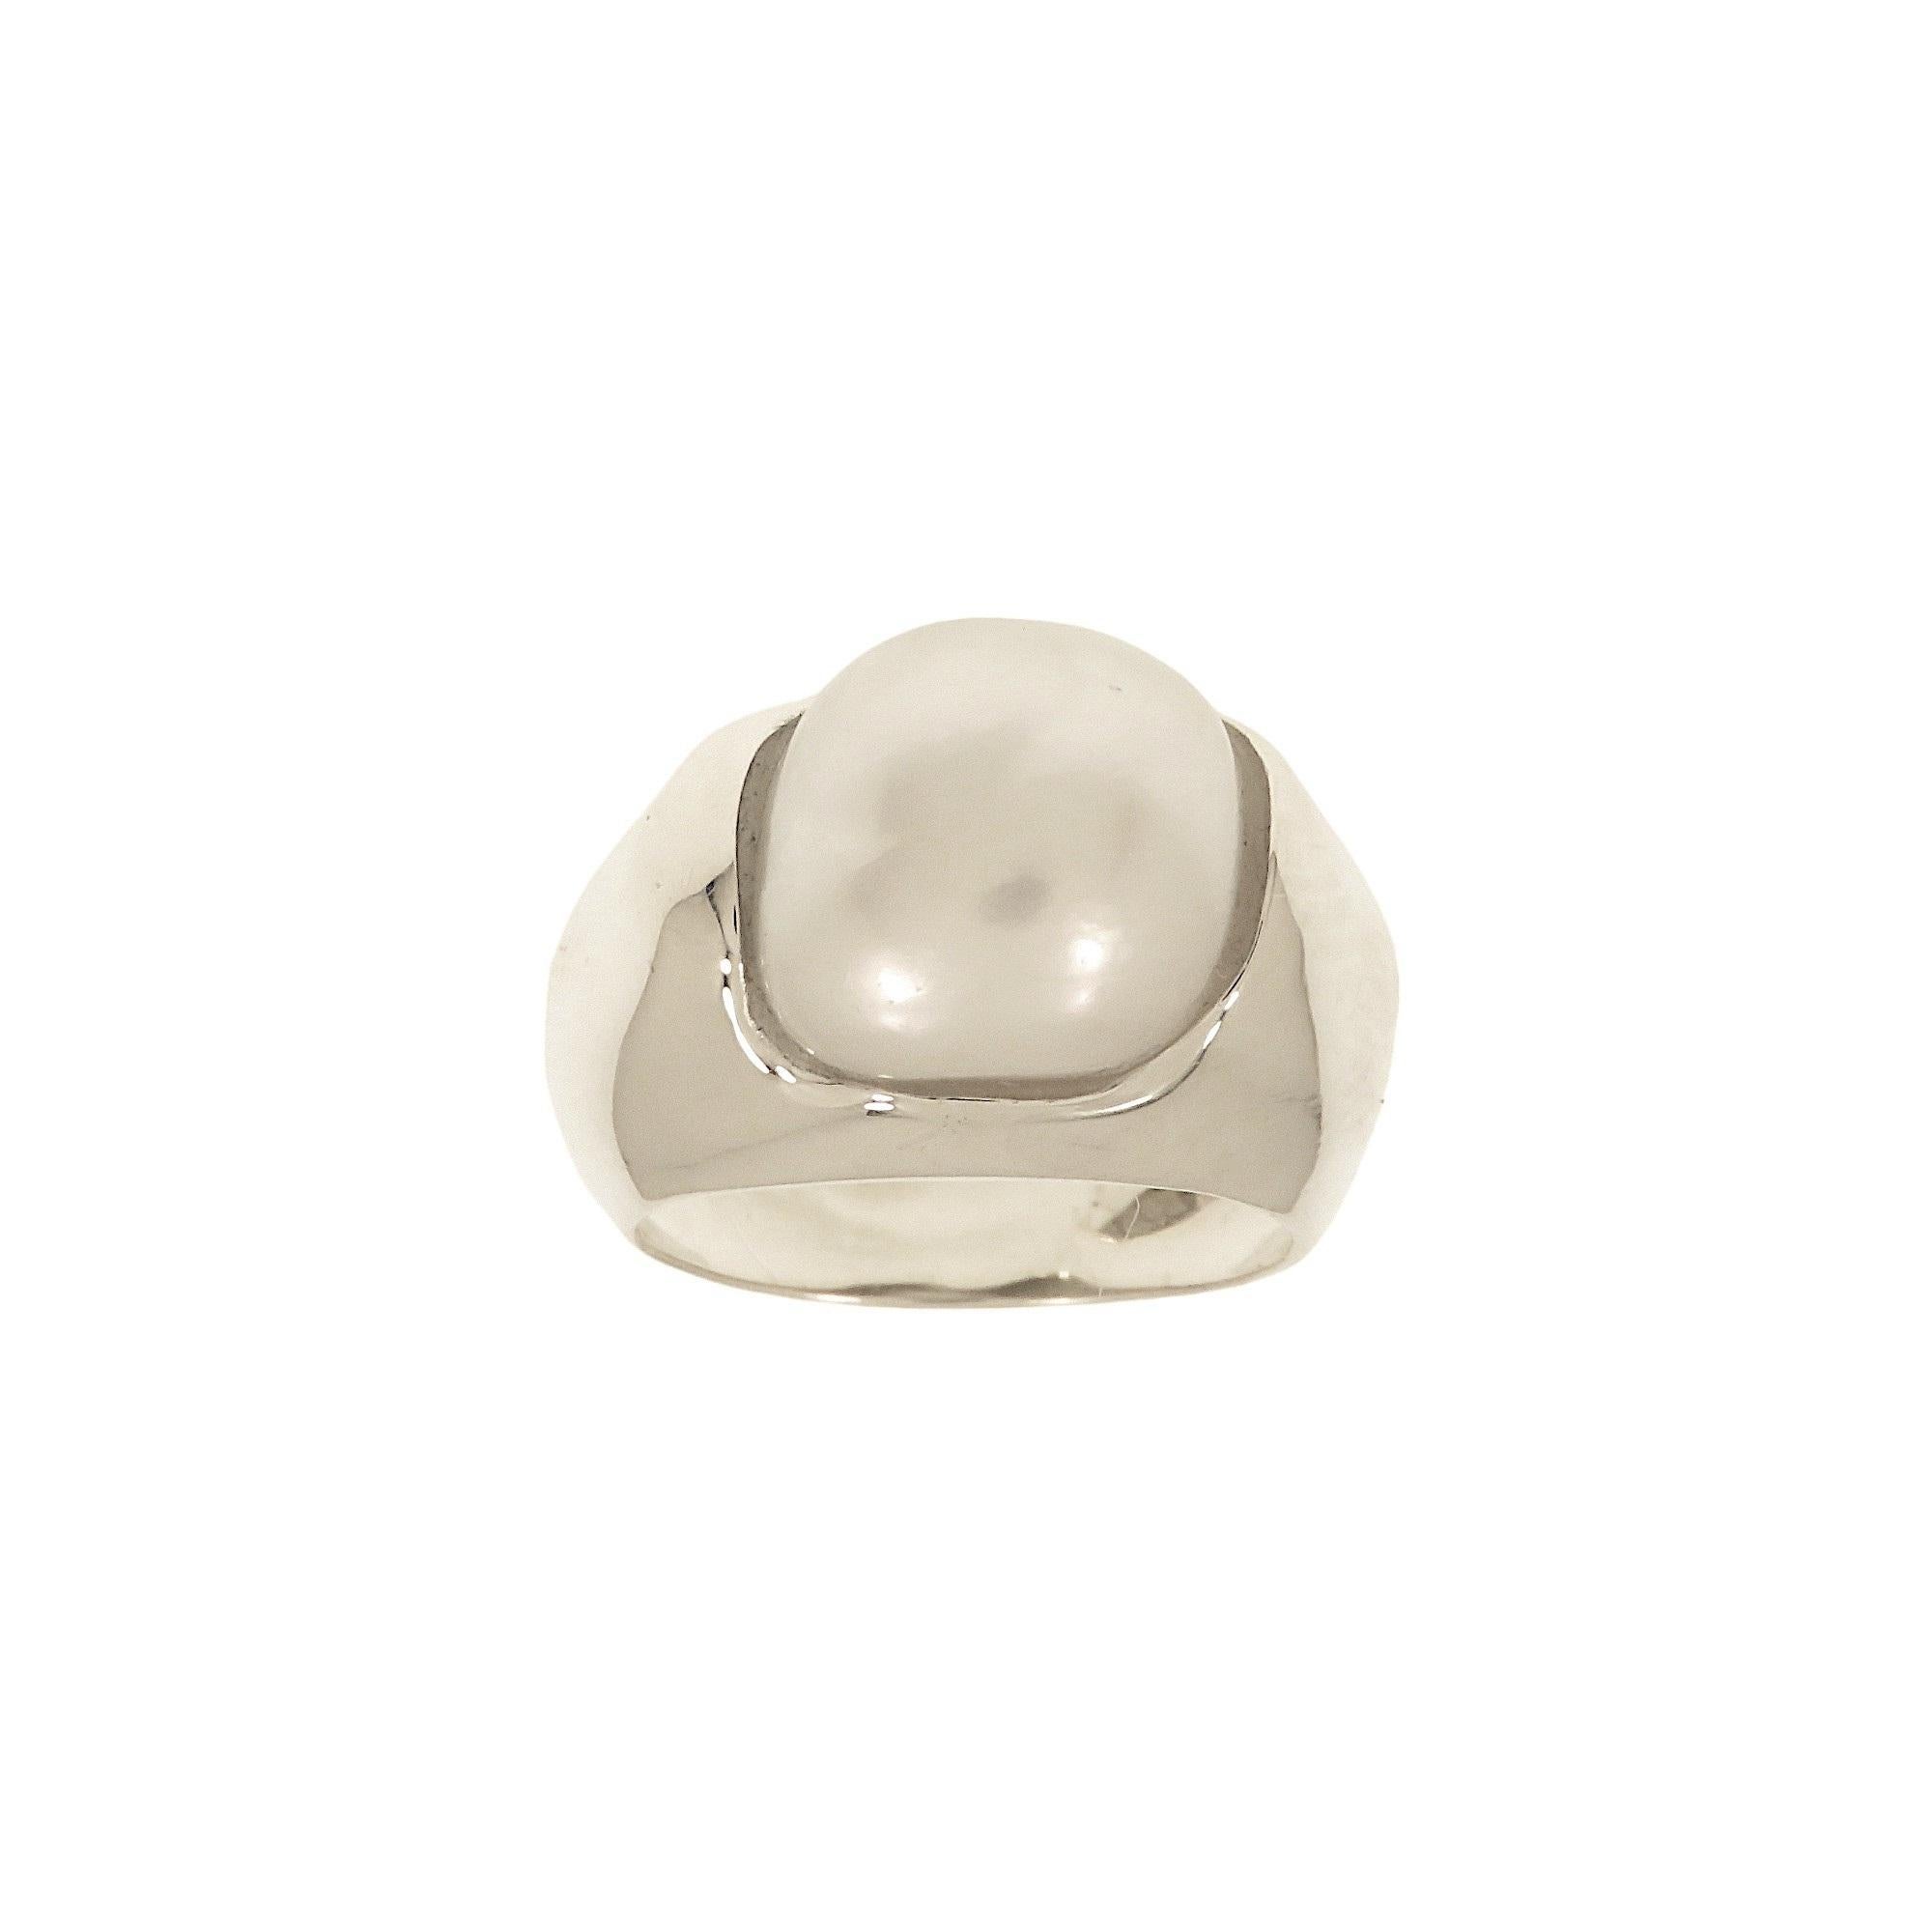 Refined 9k white gold ring made to harmoniously encircle a stunning Australian Baroque pearl measuring 14x12 mm / 0.55x0.47 inches for a weight of 13 carats.  The pearl grown in Australia has an extraordinarily beautiful silver-white color and is